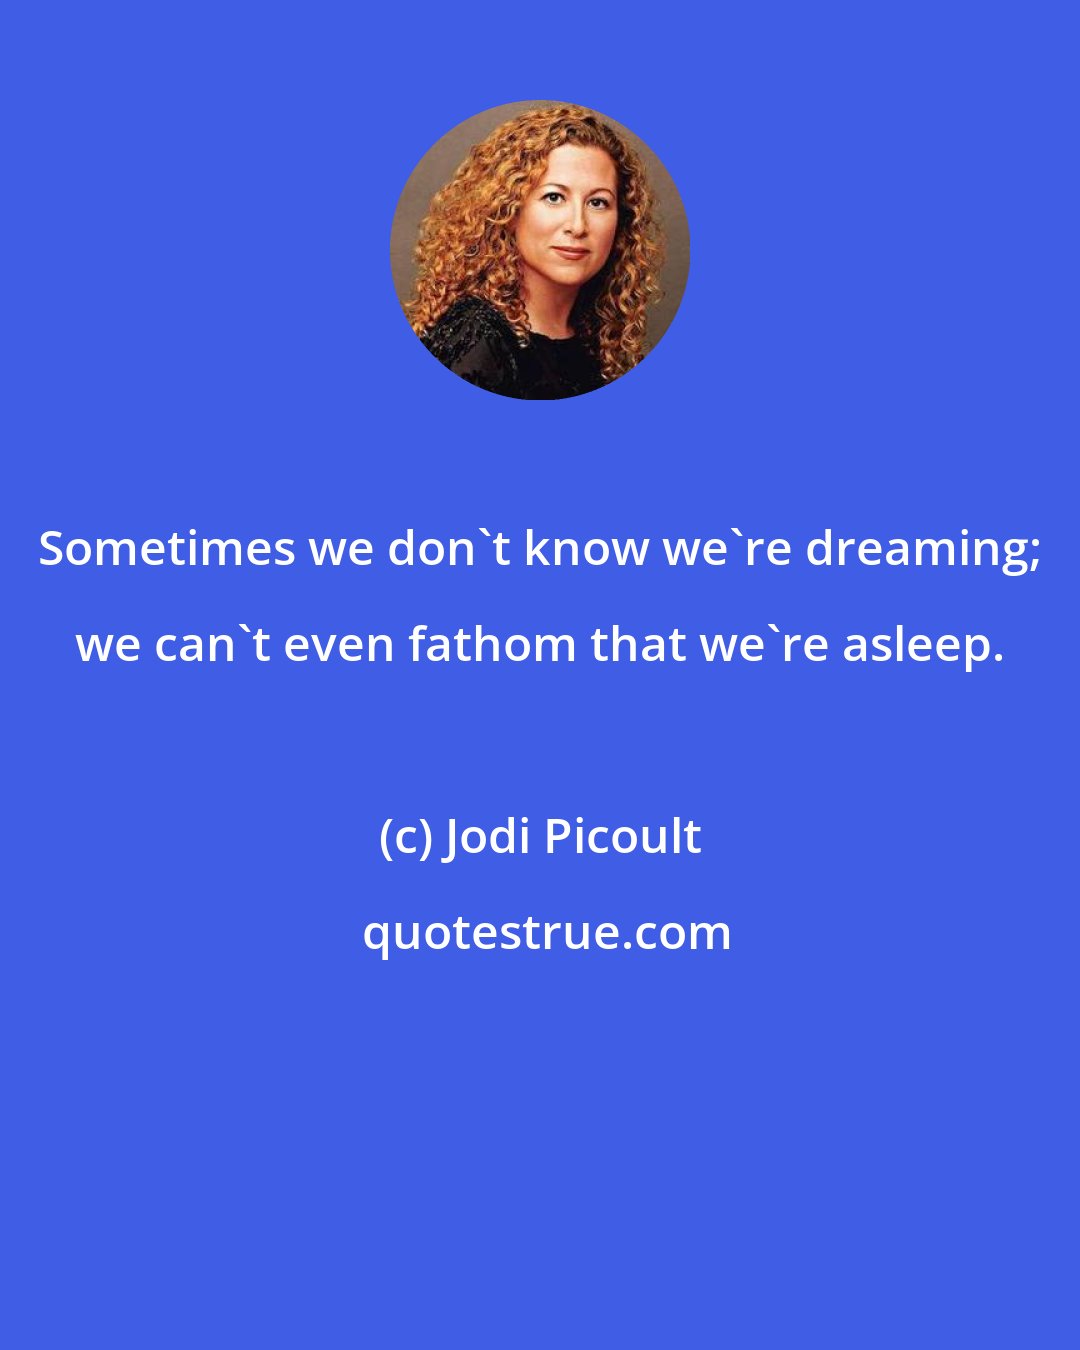 Jodi Picoult: Sometimes we don't know we're dreaming; we can't even fathom that we're asleep.